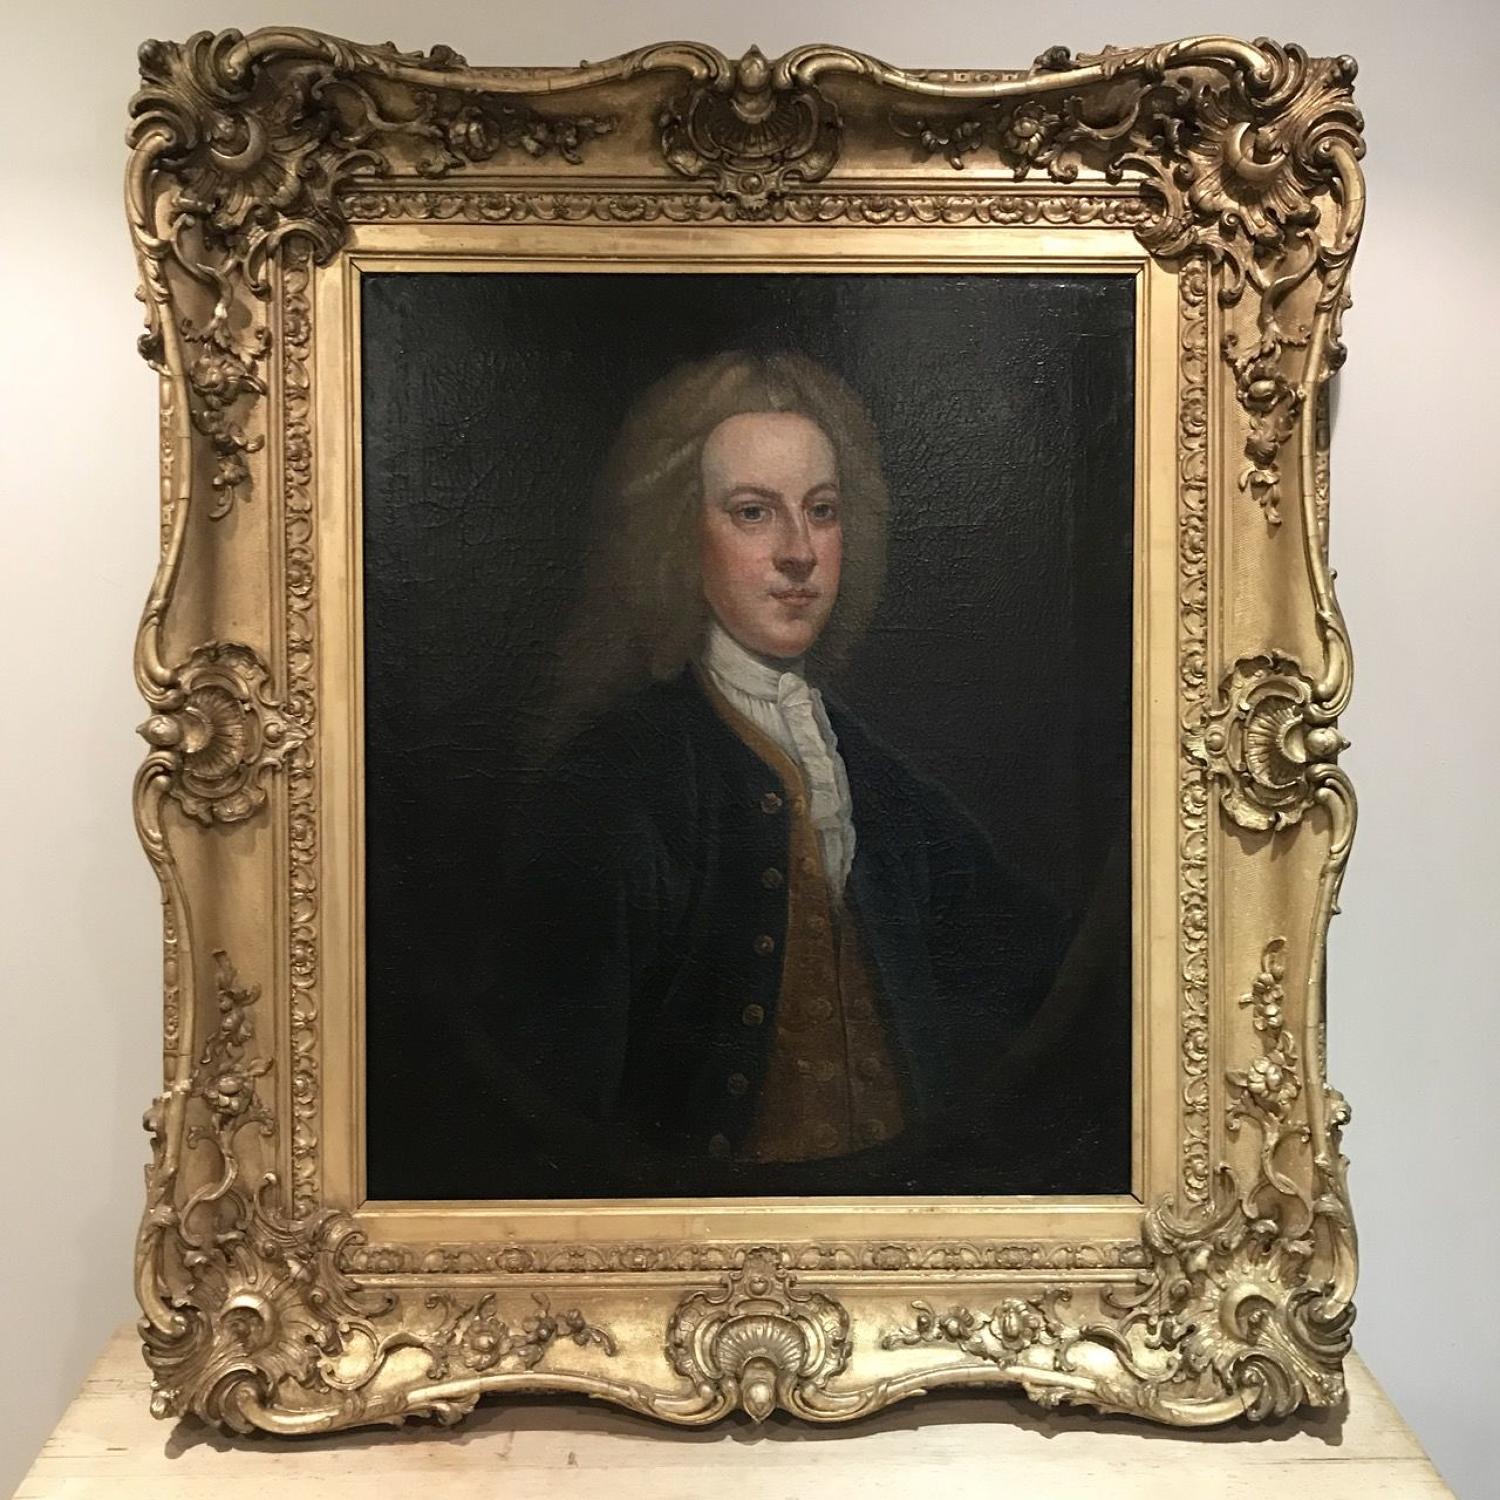 EARLY 18TH CENTURY PORTRAIT PAINTING